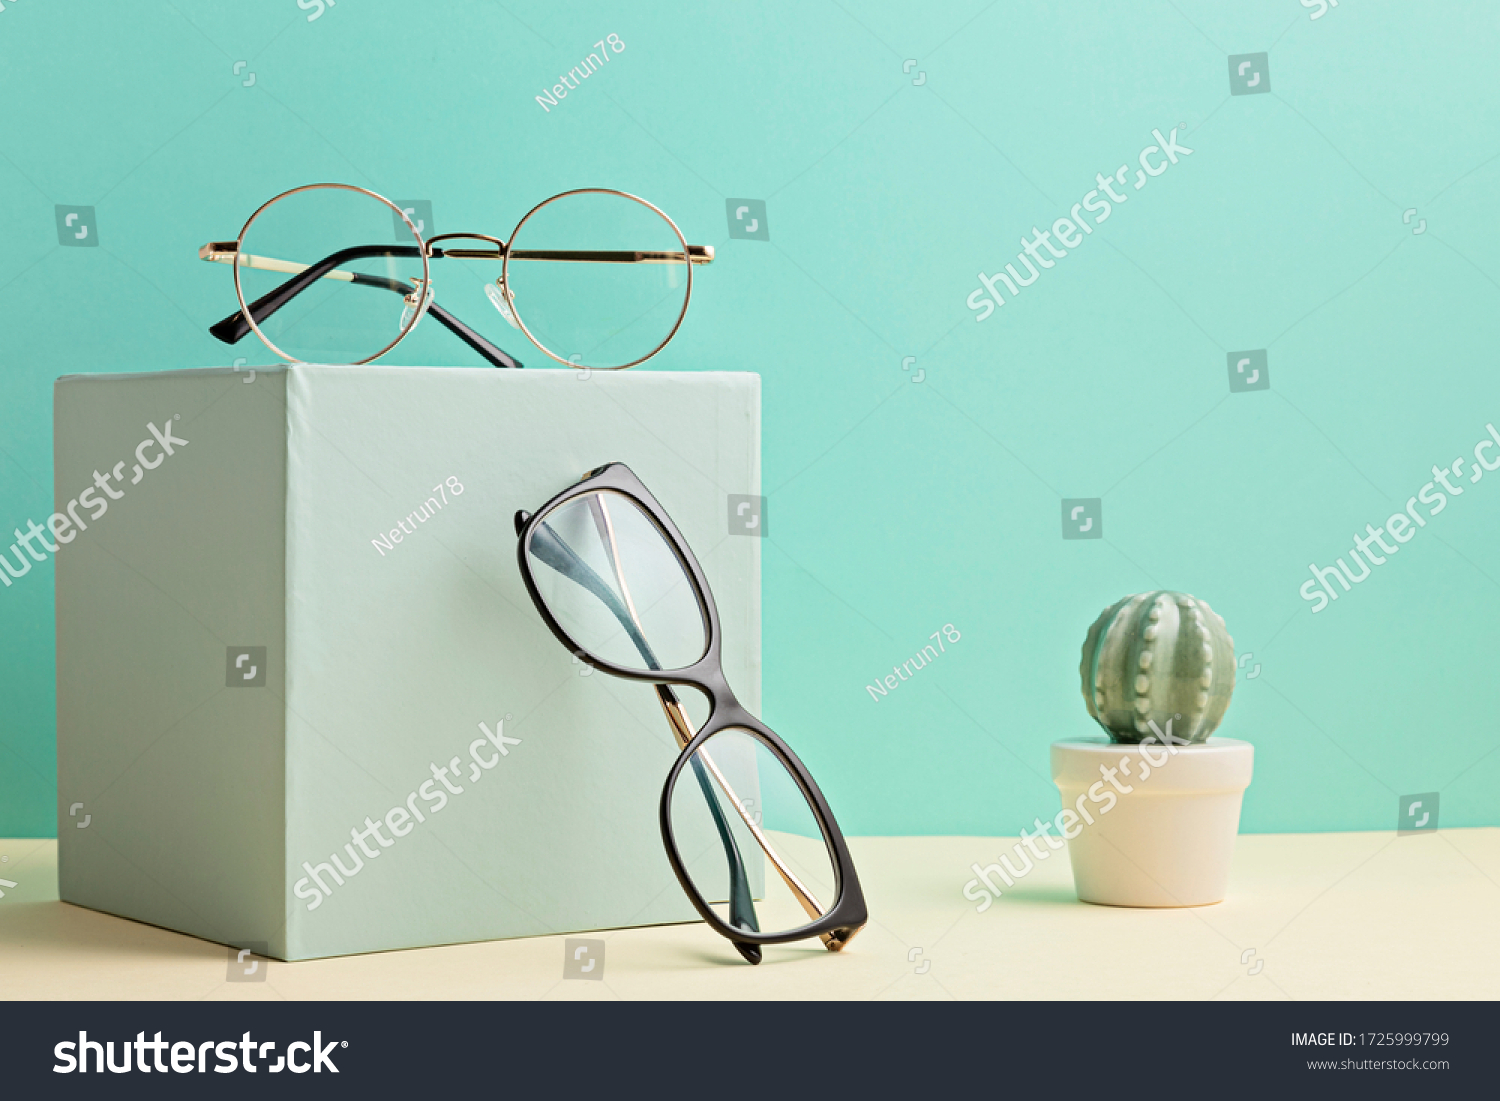 Stylish eyeglasses over pastel  background. Optical store, glasses selection, eye test, vision examination at optician, fashion accessories concept. Front view  #1725999799